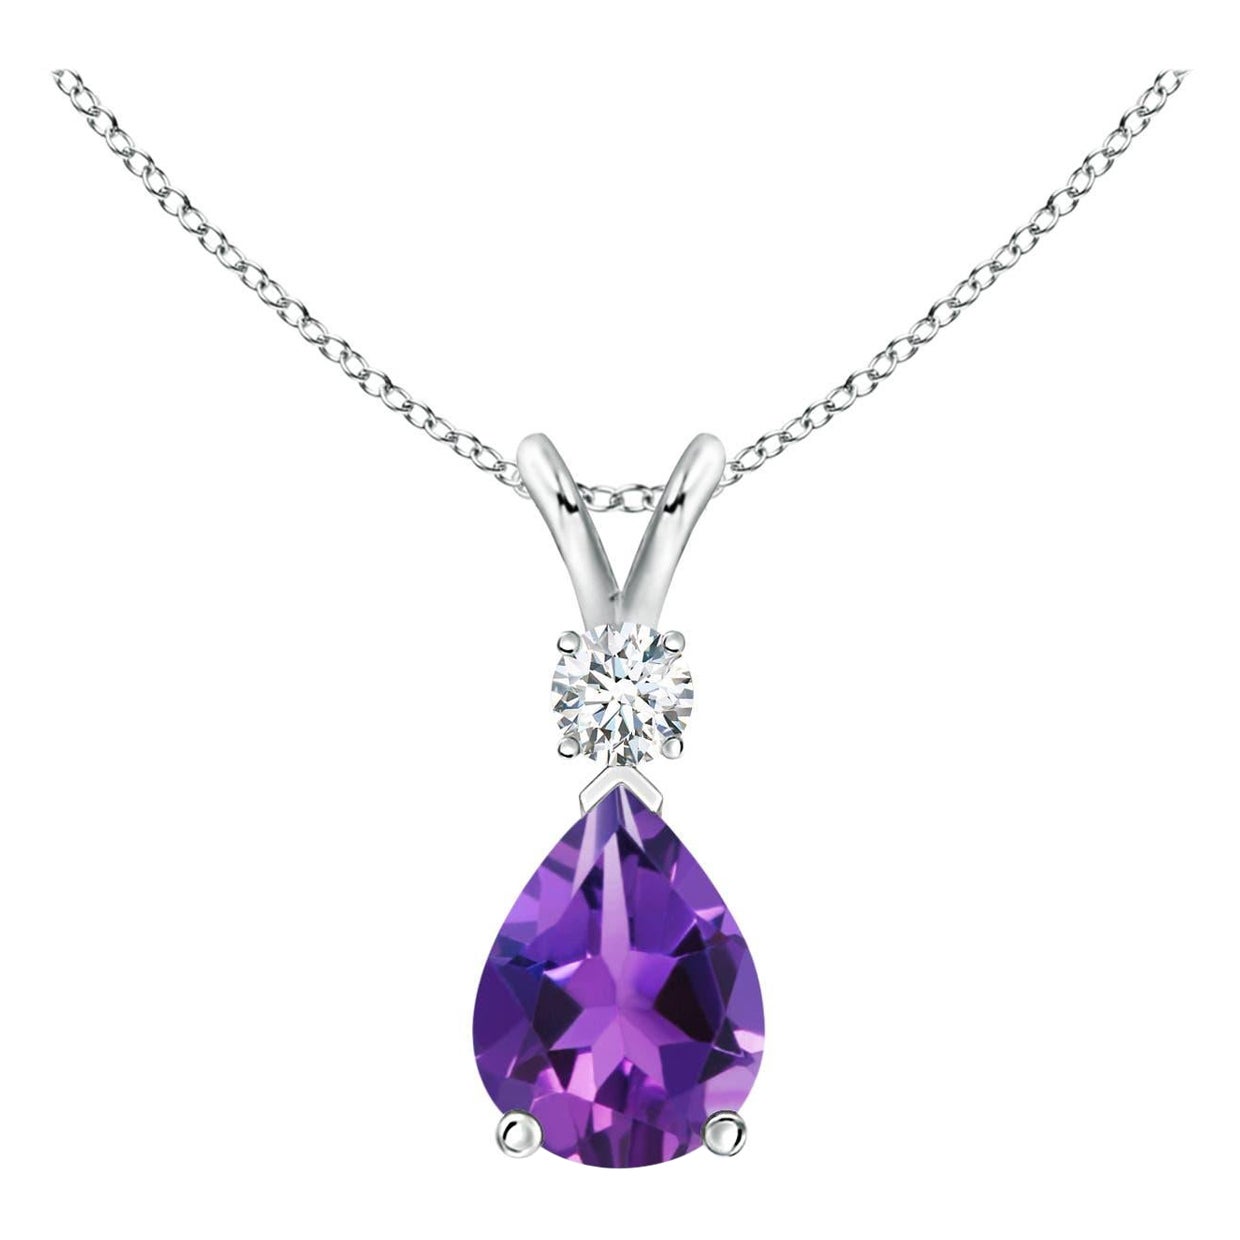 Natural 1 ct Amethyst Teardrop Pendant with Diamond in 14K White Gold